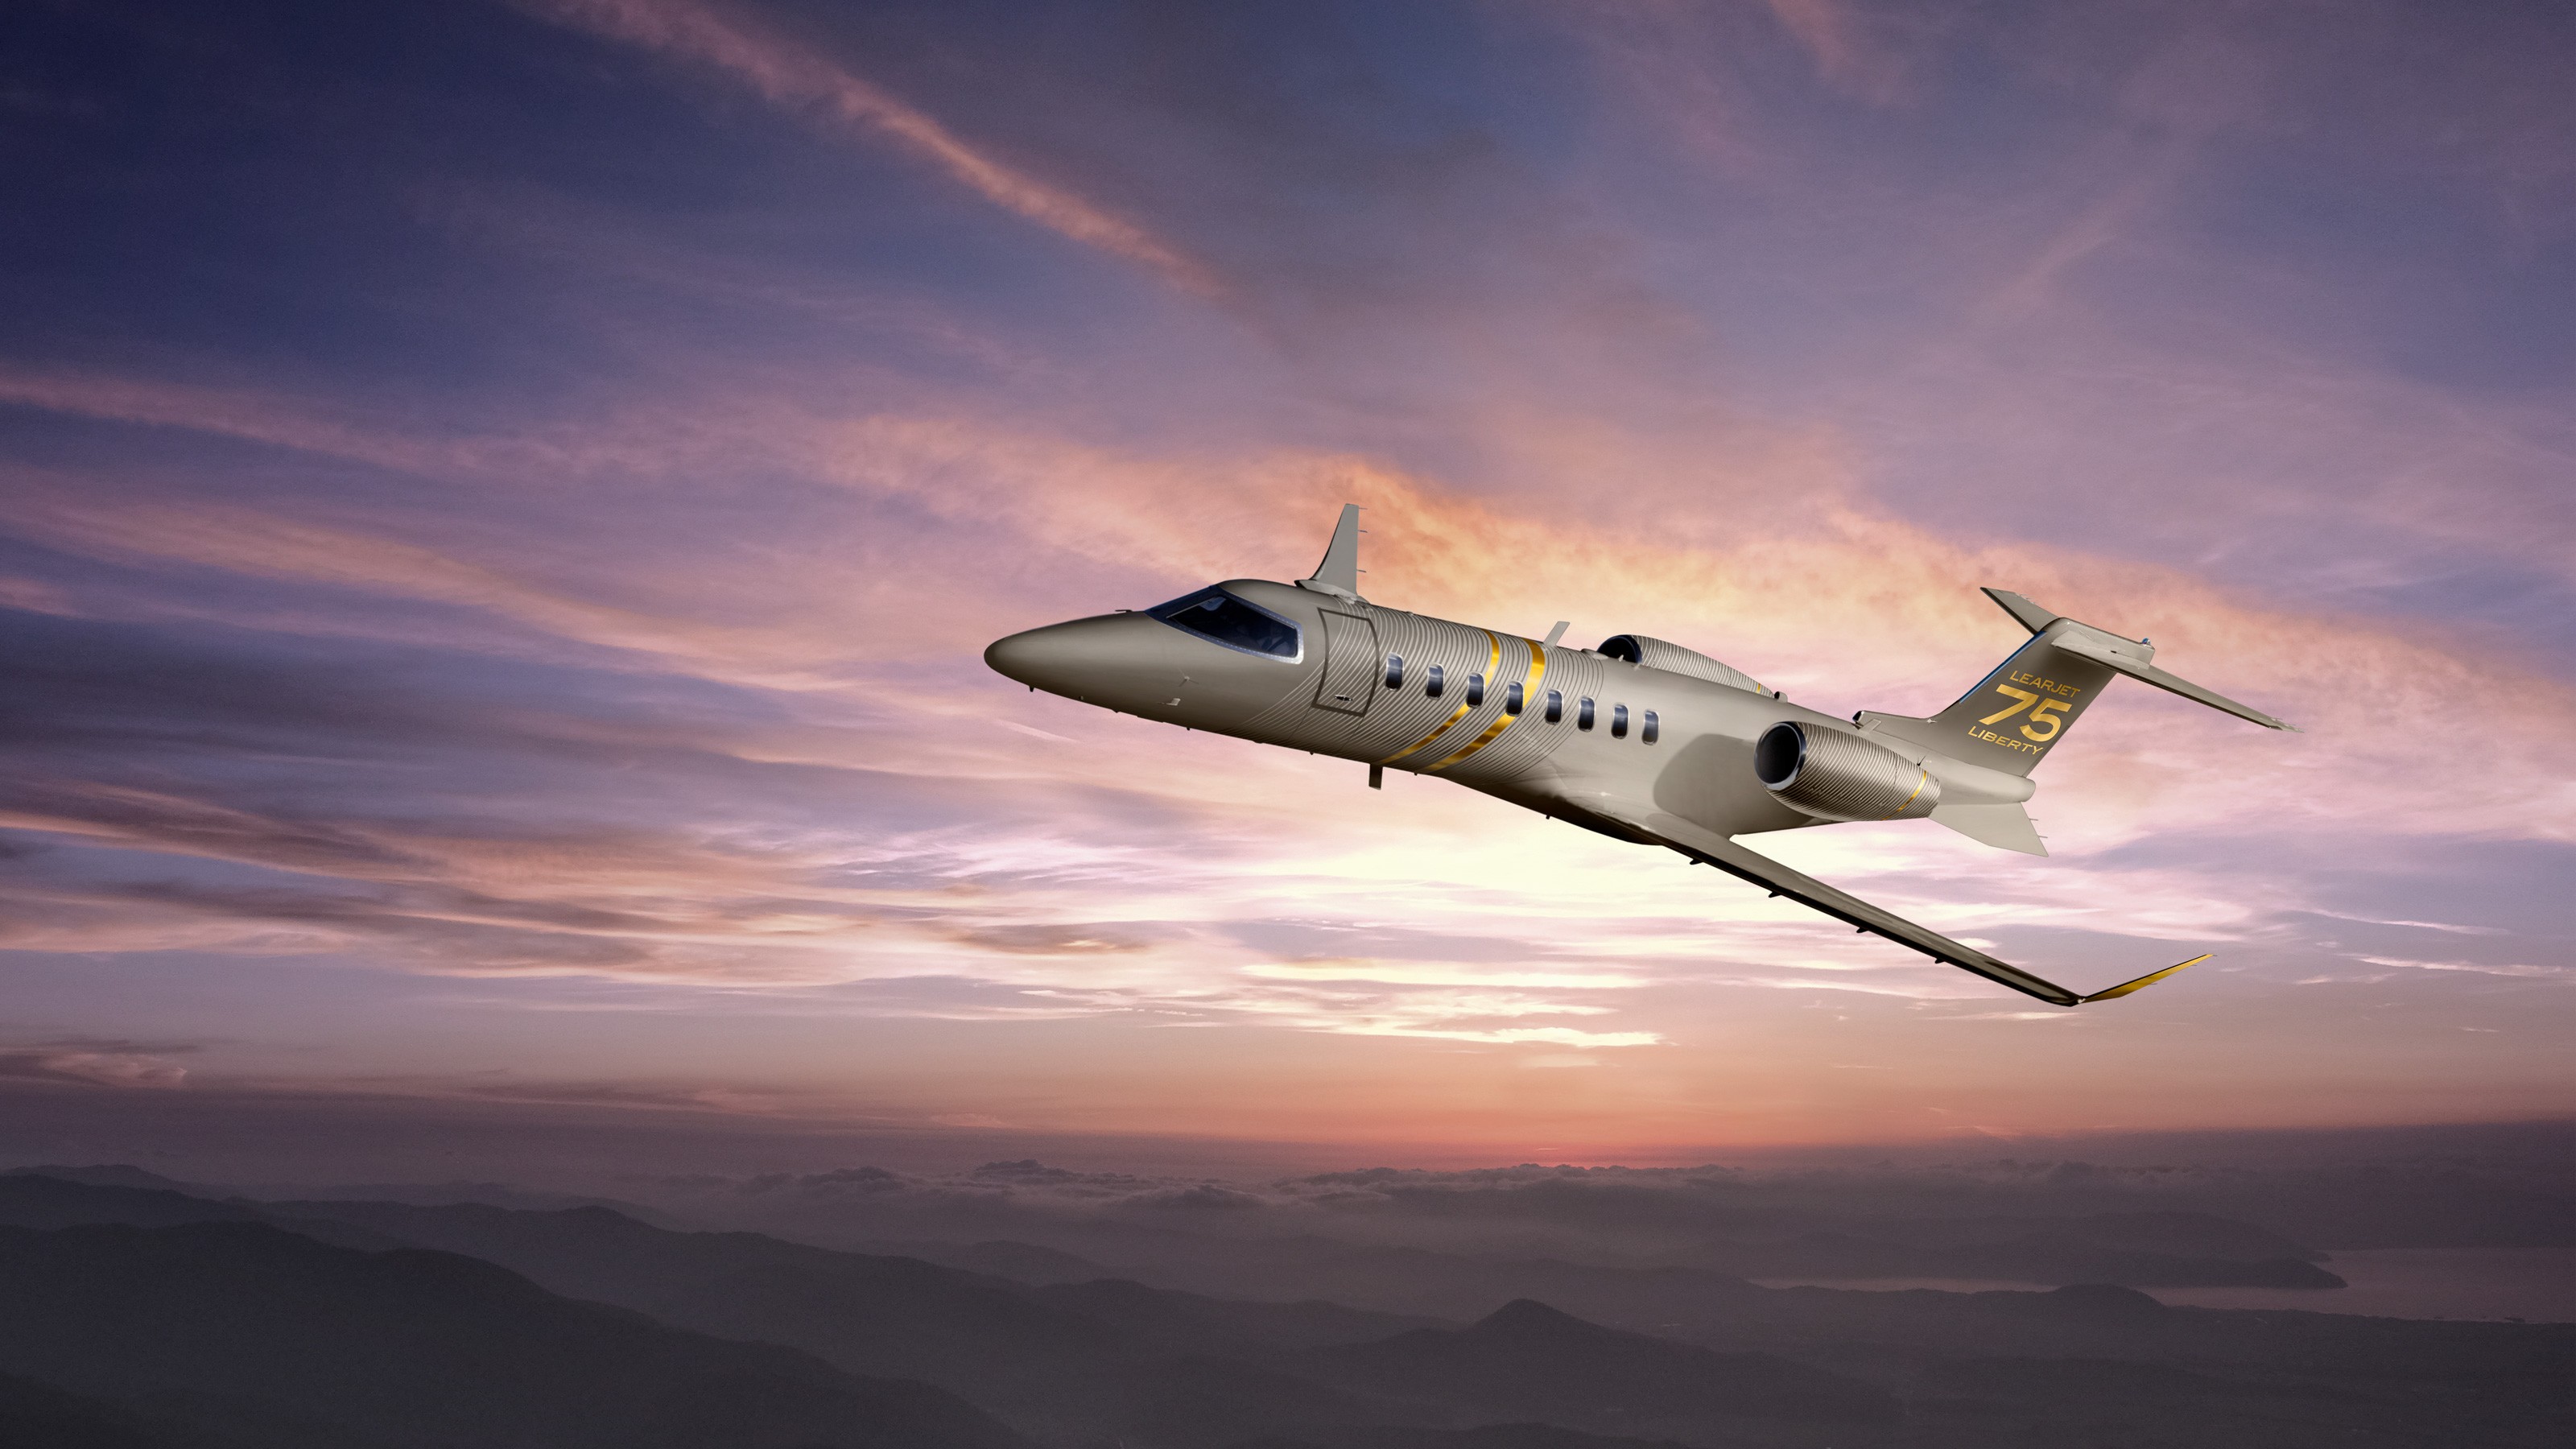 Introducing the Learjet 75 Liberty: The Most Accessible Business Jet by Bombardier